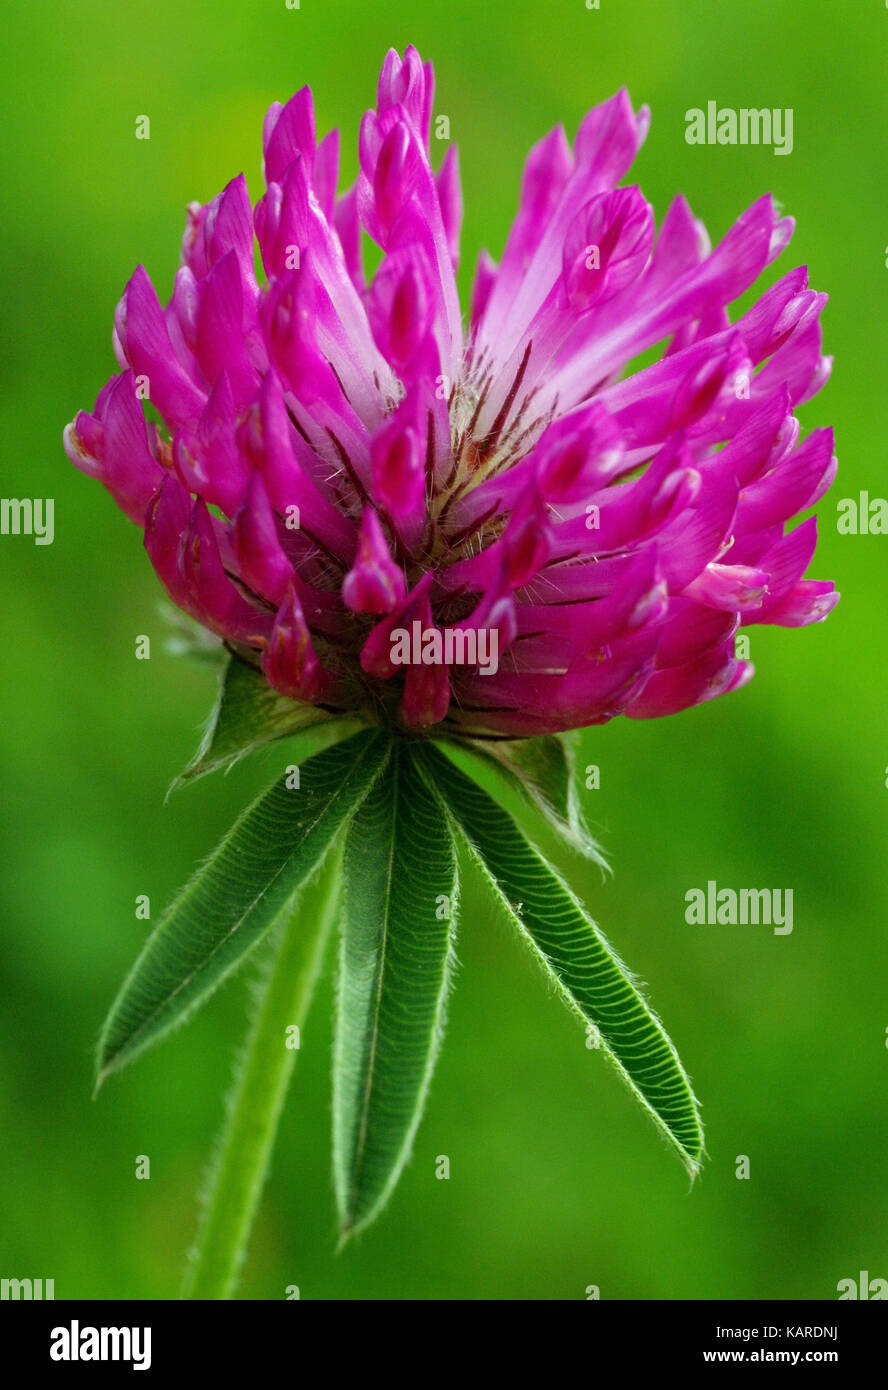 this is Trifolium alpestre, the Purple globe clover or Owl-head clover, from the family Fabaceae (Leguminosae) Stock Photo